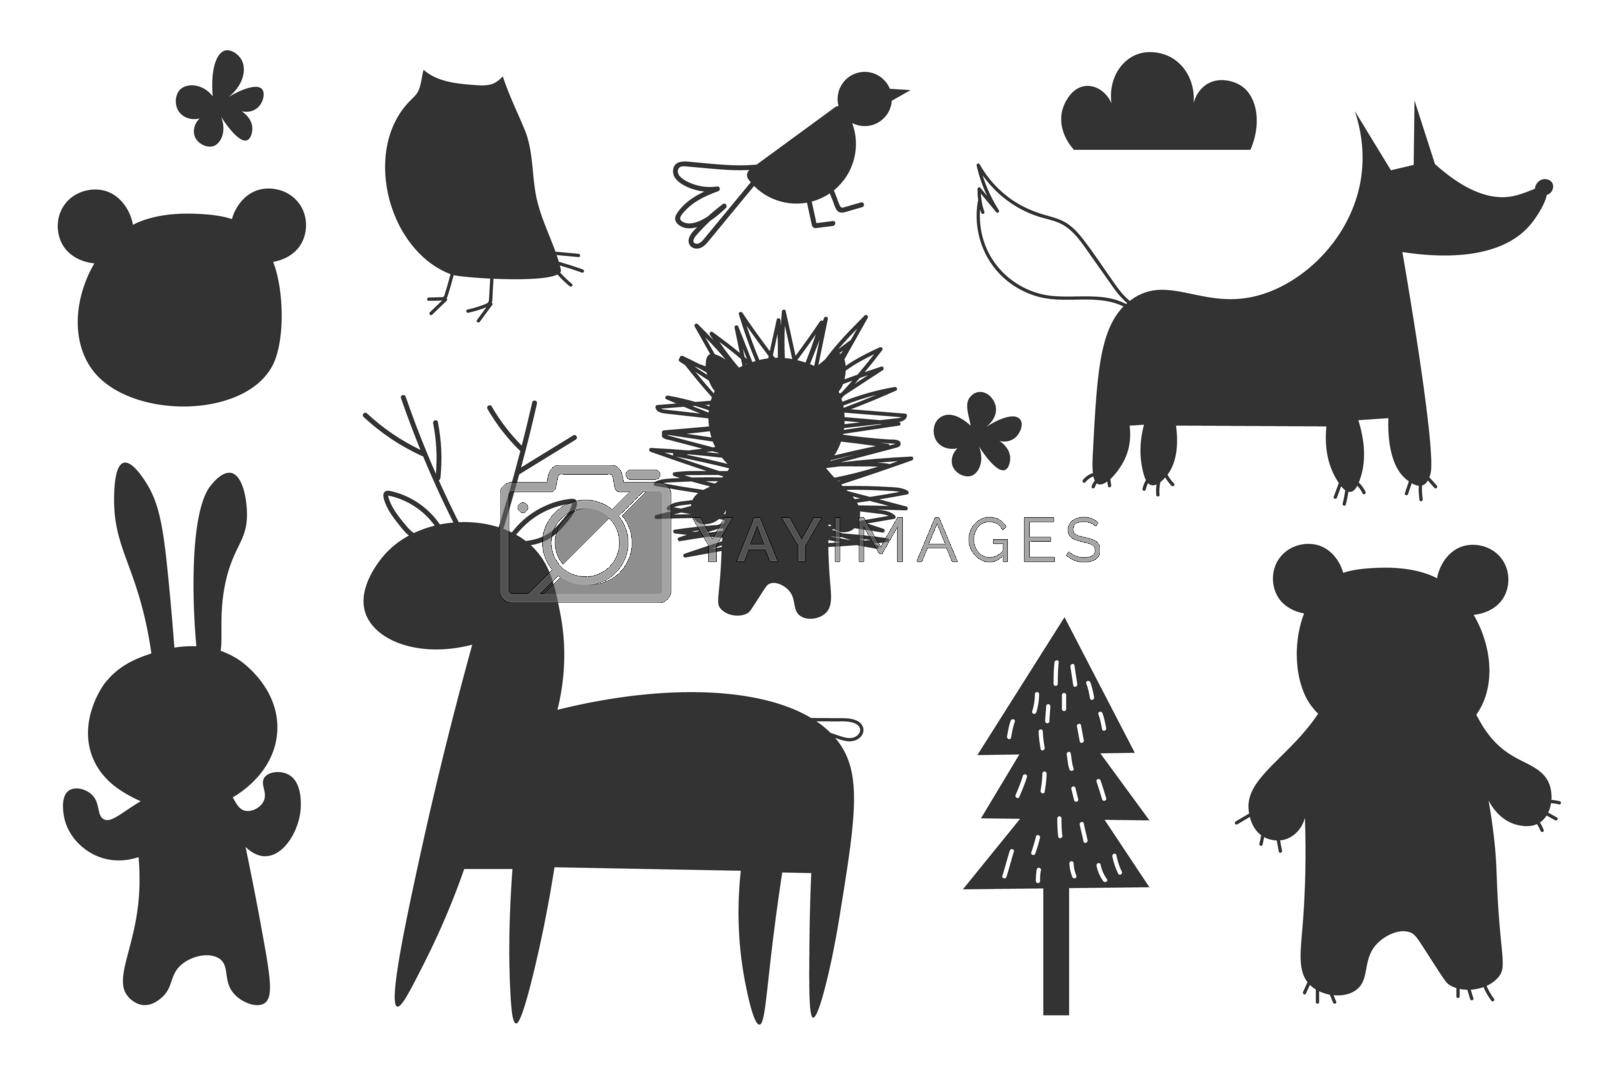 Forest animals silhouettes, isolated on white background vector illustration. Woodland forest animals collection including deer, bear, owl